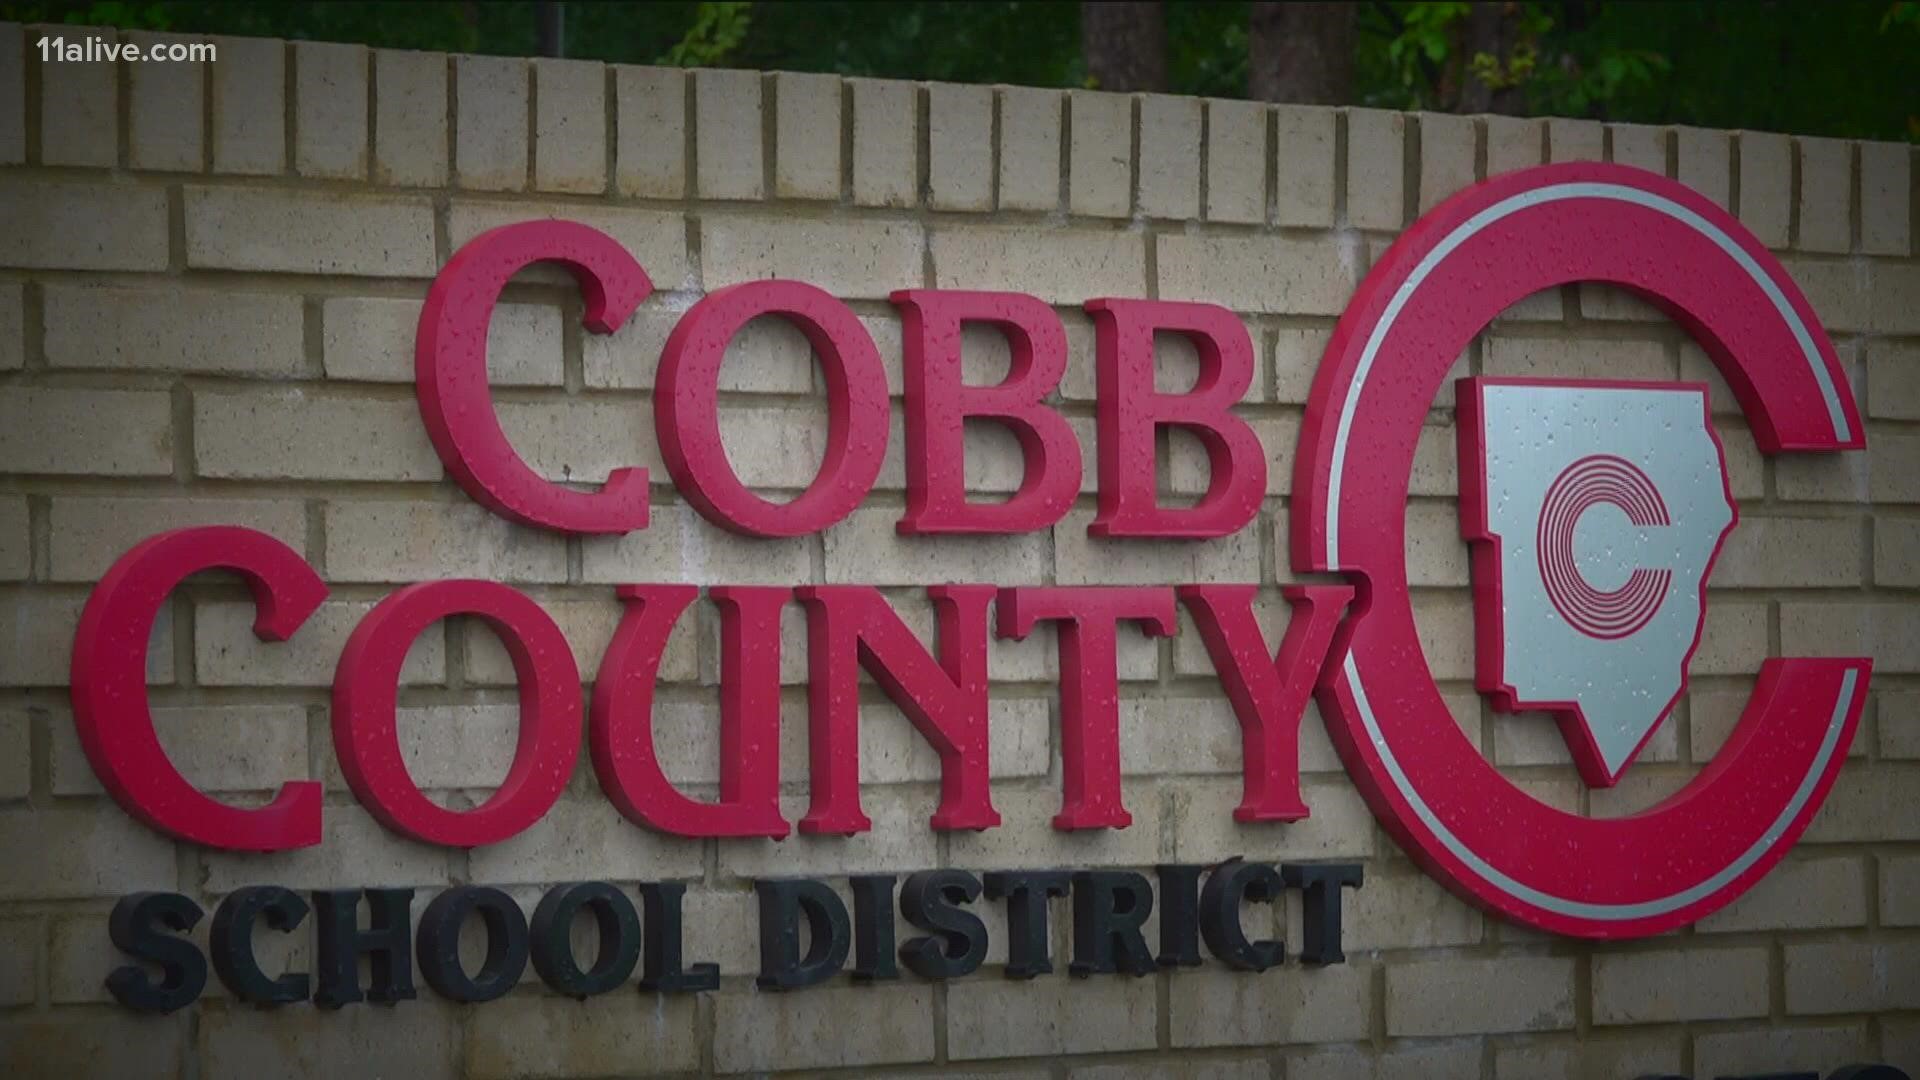 It's been less than a month since Cognia Accreditation gave the Cobb County School District a list of action steps following an investigation.